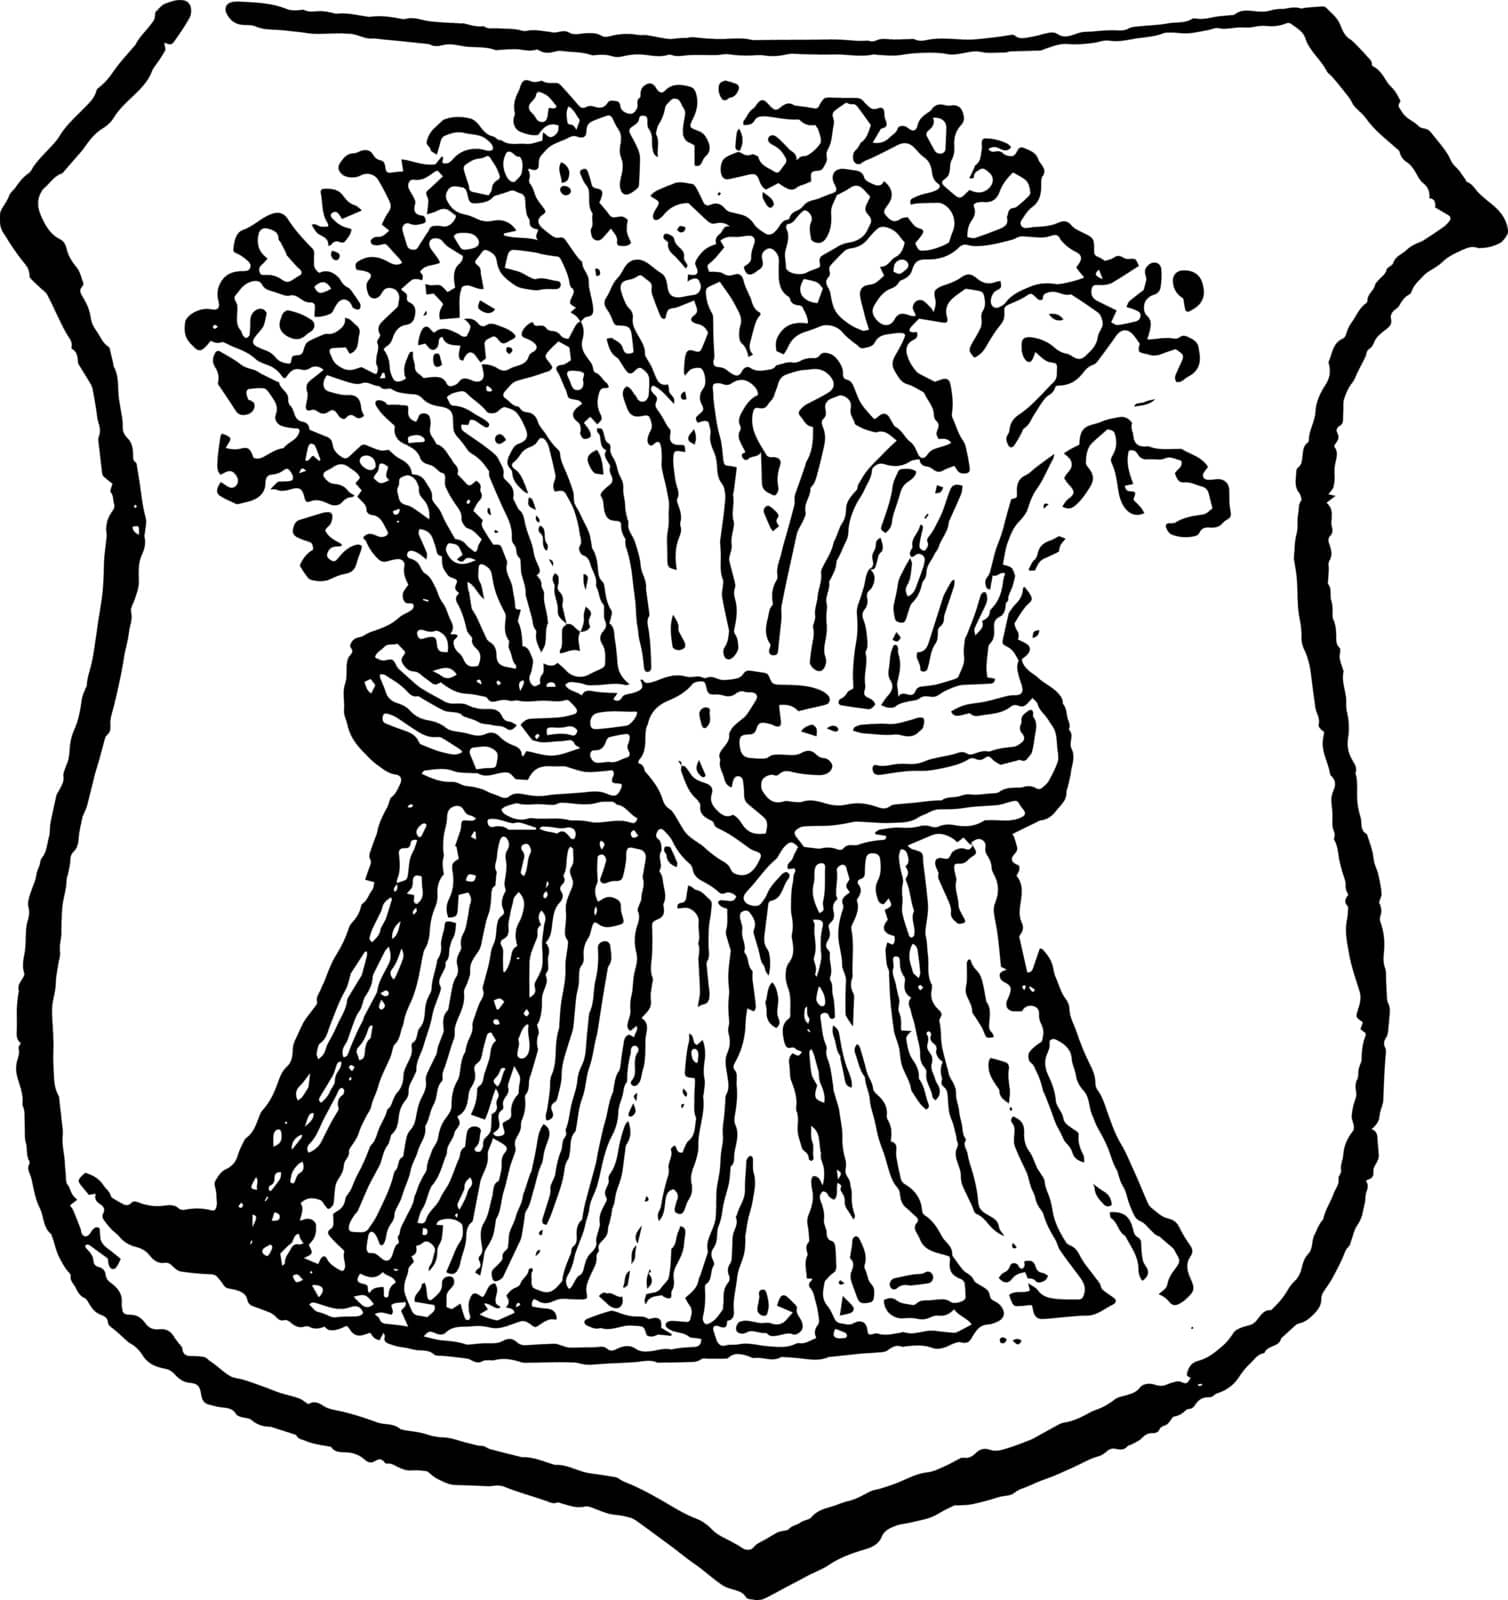 Garbe is a heraldic term for a sheaf of any kind of corn, vintage line drawing or engraving illustration.